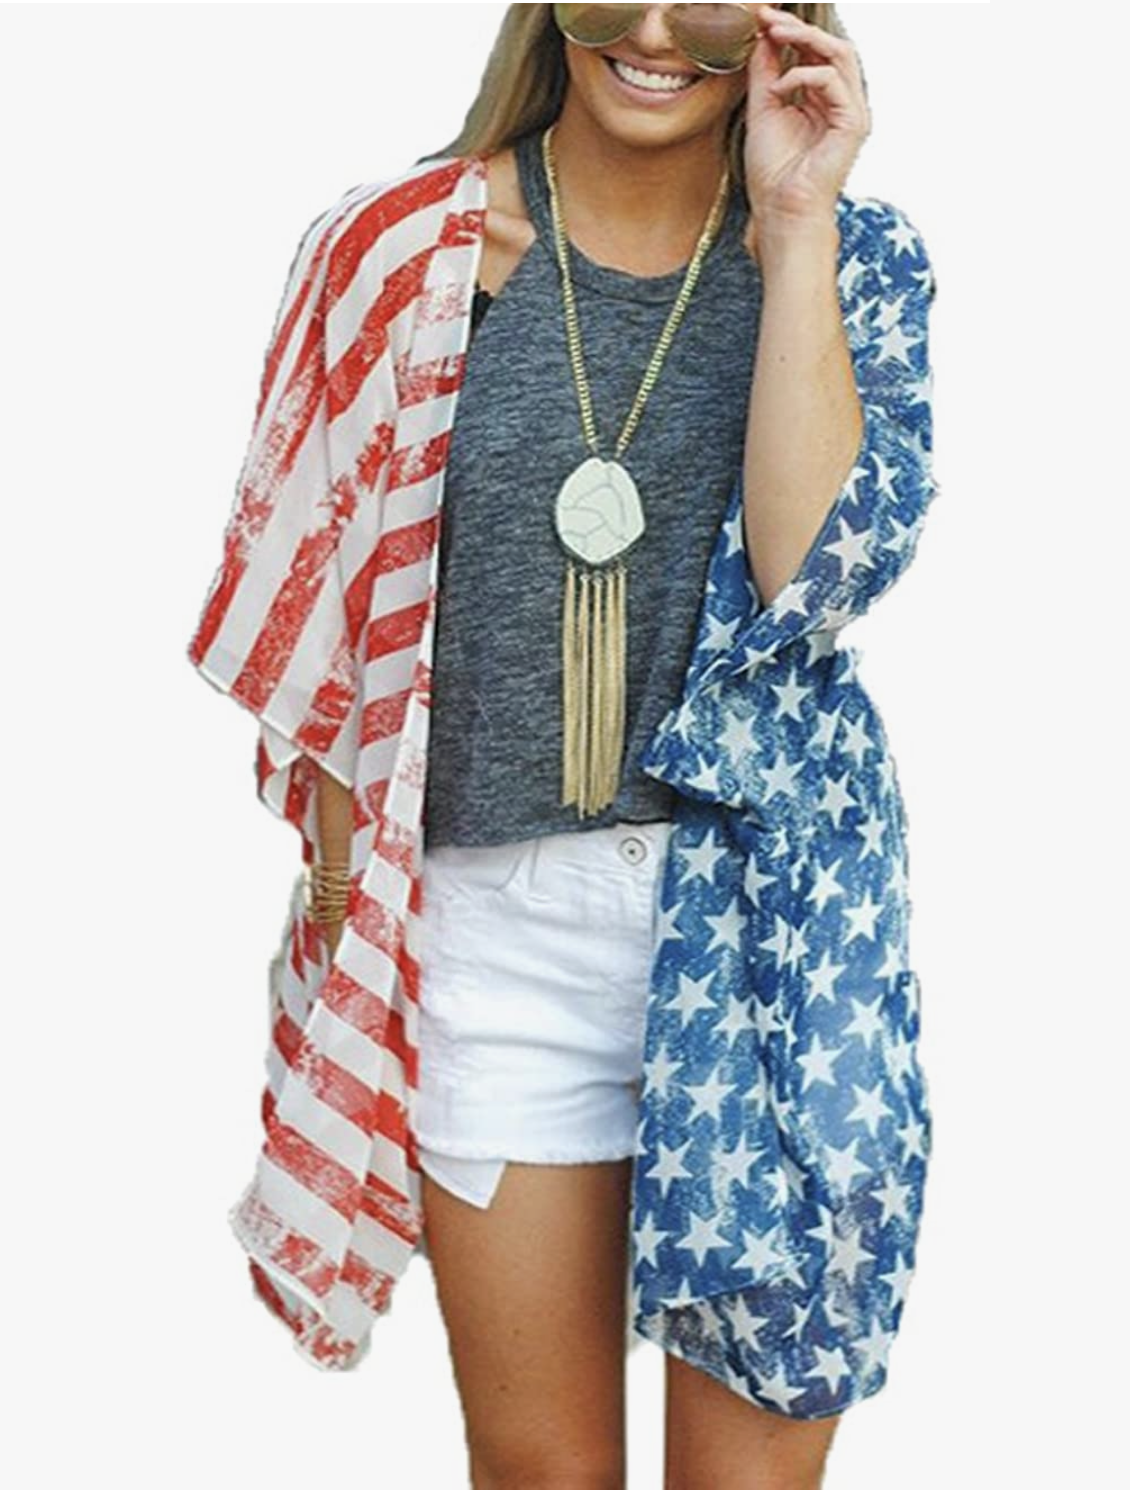 4th of July tops for women